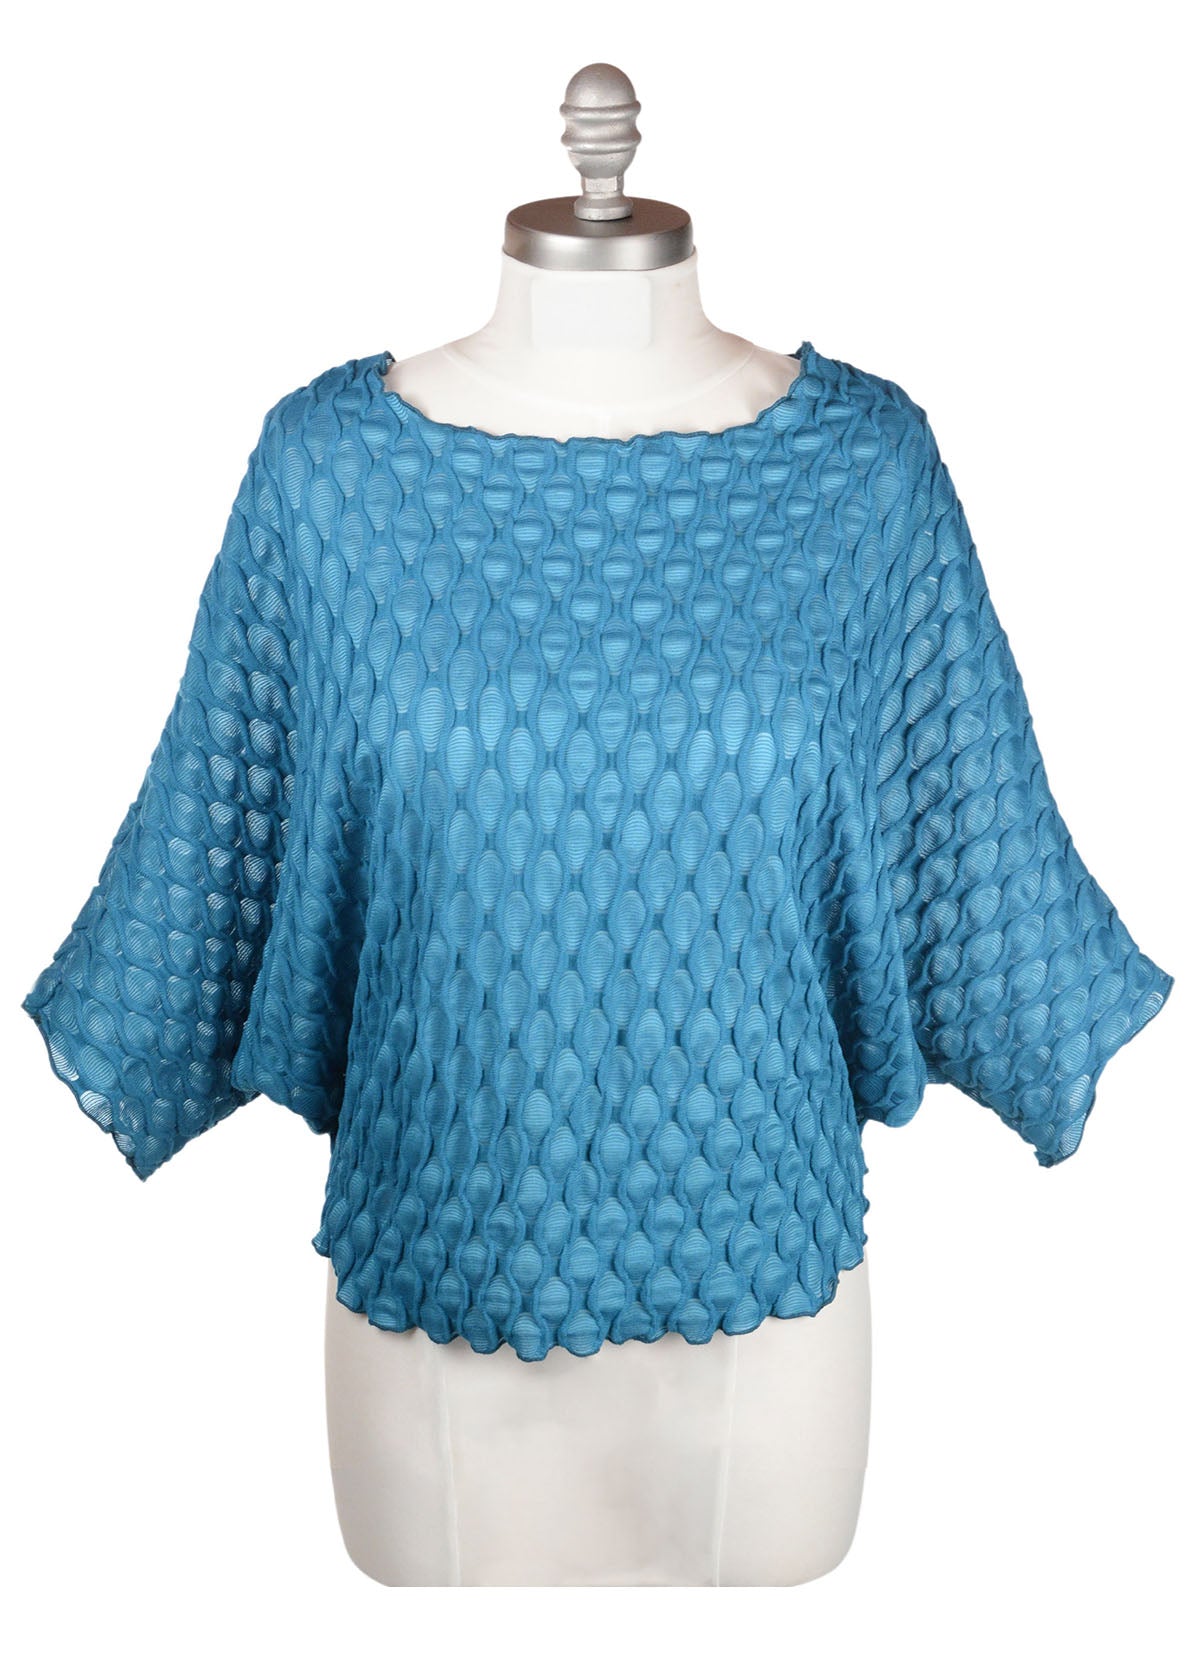 Product photo of the Batwing Top in Cerulean Blue, from the Fractal Collection. LYC and Pandemonium Seattle are handmade in Seattle, WA, USA.